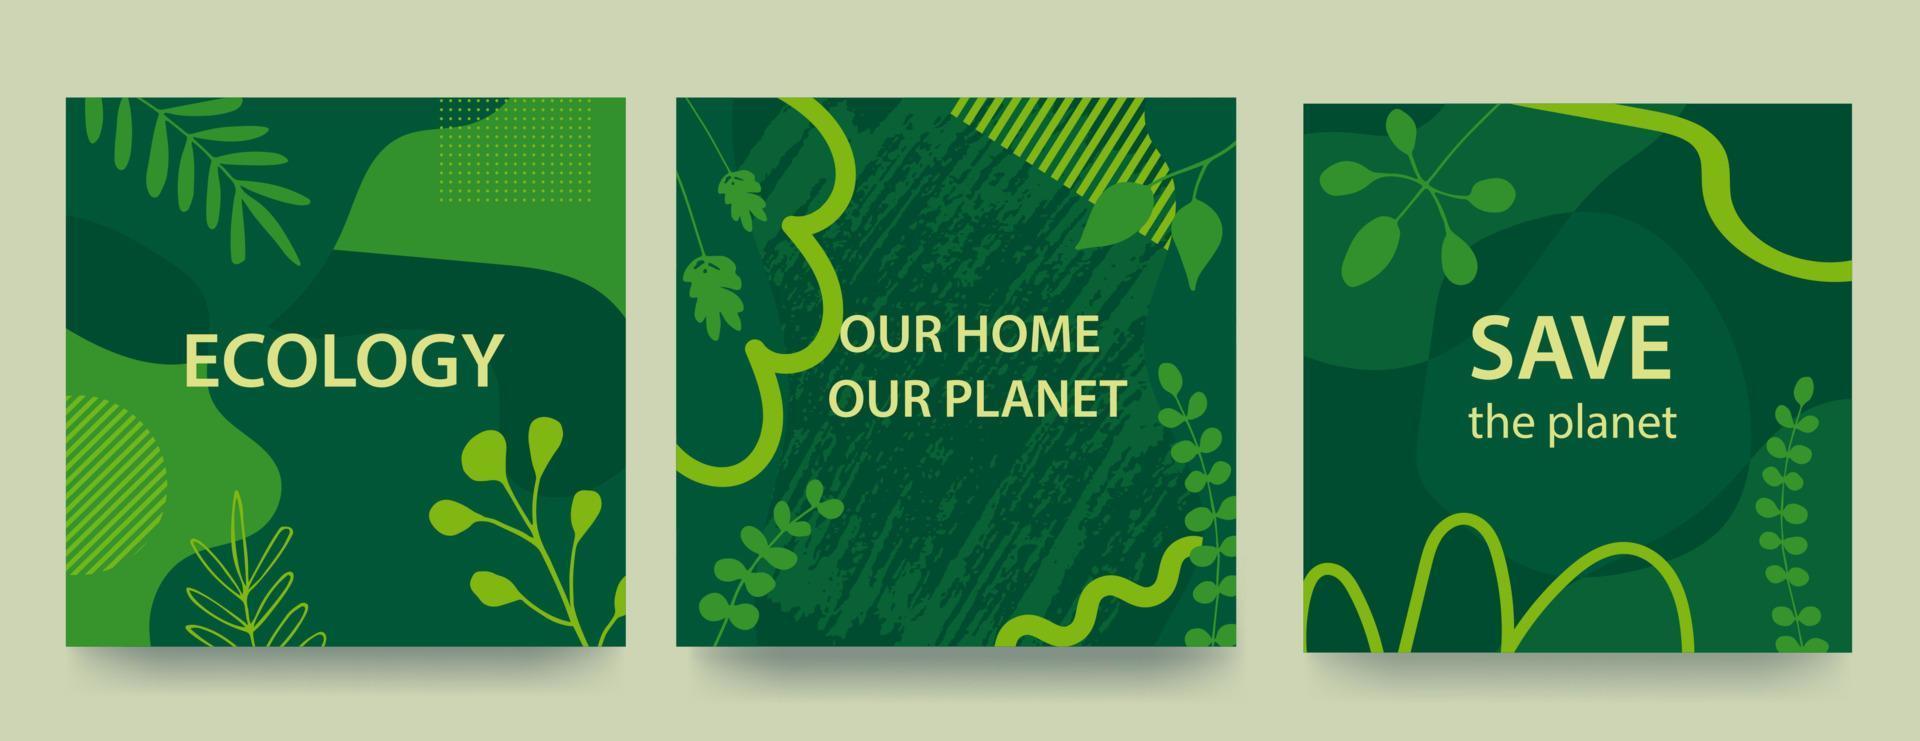 Environment Day background with green background, liquid shapes and plants. Eco concept. Save the Earth. Vector